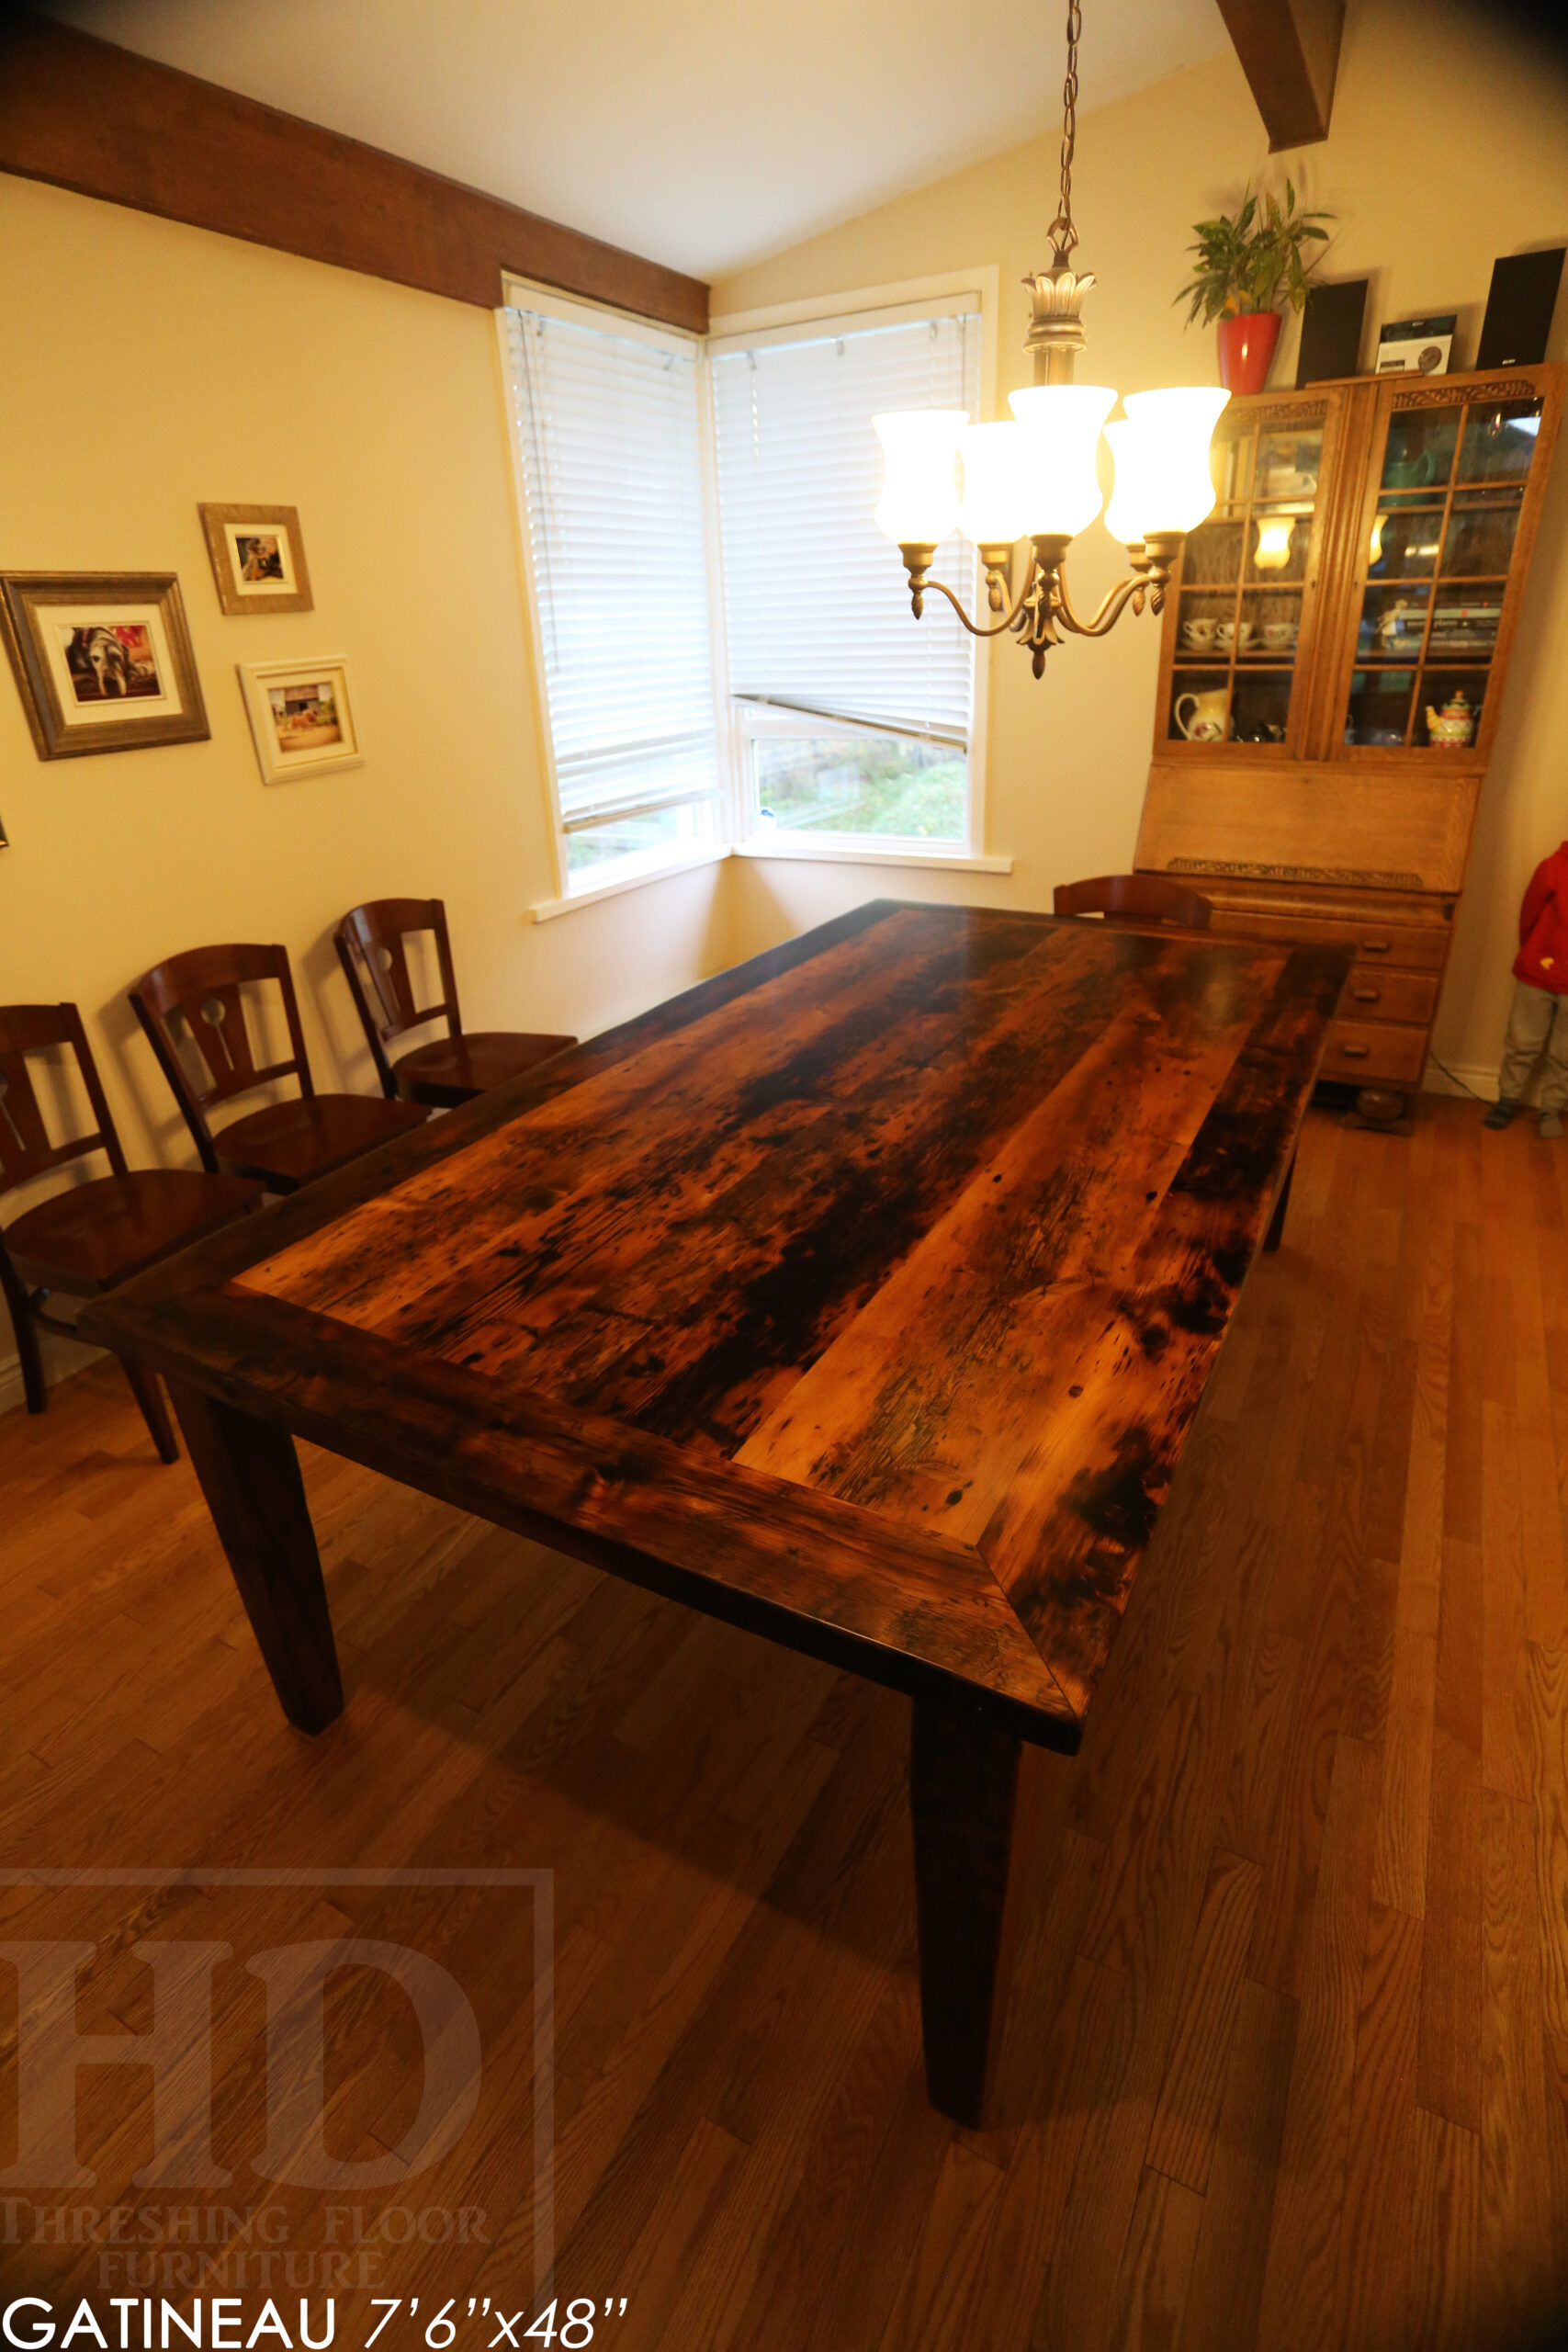 7' 6" Reclaimed Wood Harvest Table we made for a Gatineau, Quebec home - 48" wide - Tapered with a Notch Windbrace Beam Legs - Hemlock Ontario Barnwood Threshing Floor 2" Top - Original edges & distressing maintained - Premium epoxy + matte polyurethane finish - www.table.ca